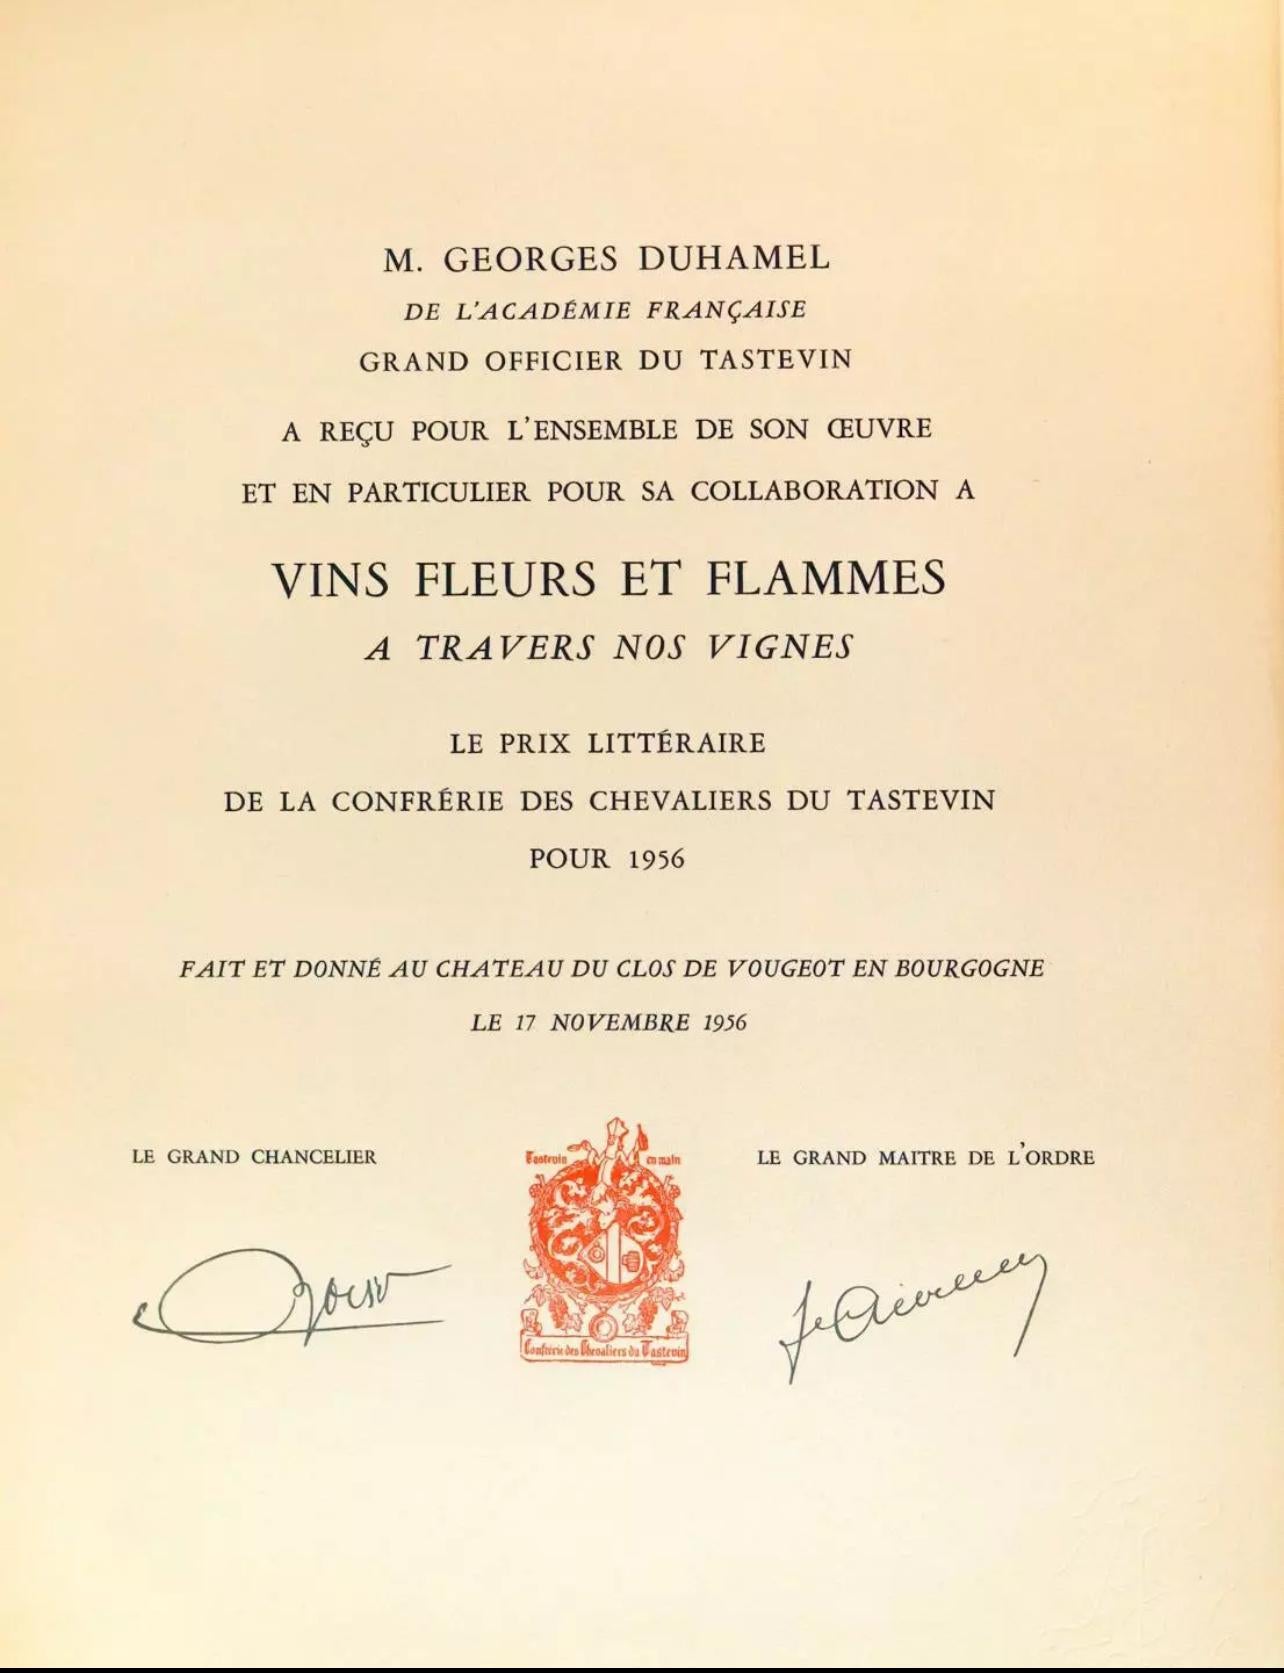 Lithograph and Stencil on grand vélin d'Arches spécial paper. Unsigned and unnumbered, as issued. Good condition. Notes: From the volume, Vins, Fleurs et Flammes, 1956. Published by M. Georges Duhamel, the L'Académie française, Grand Officier du